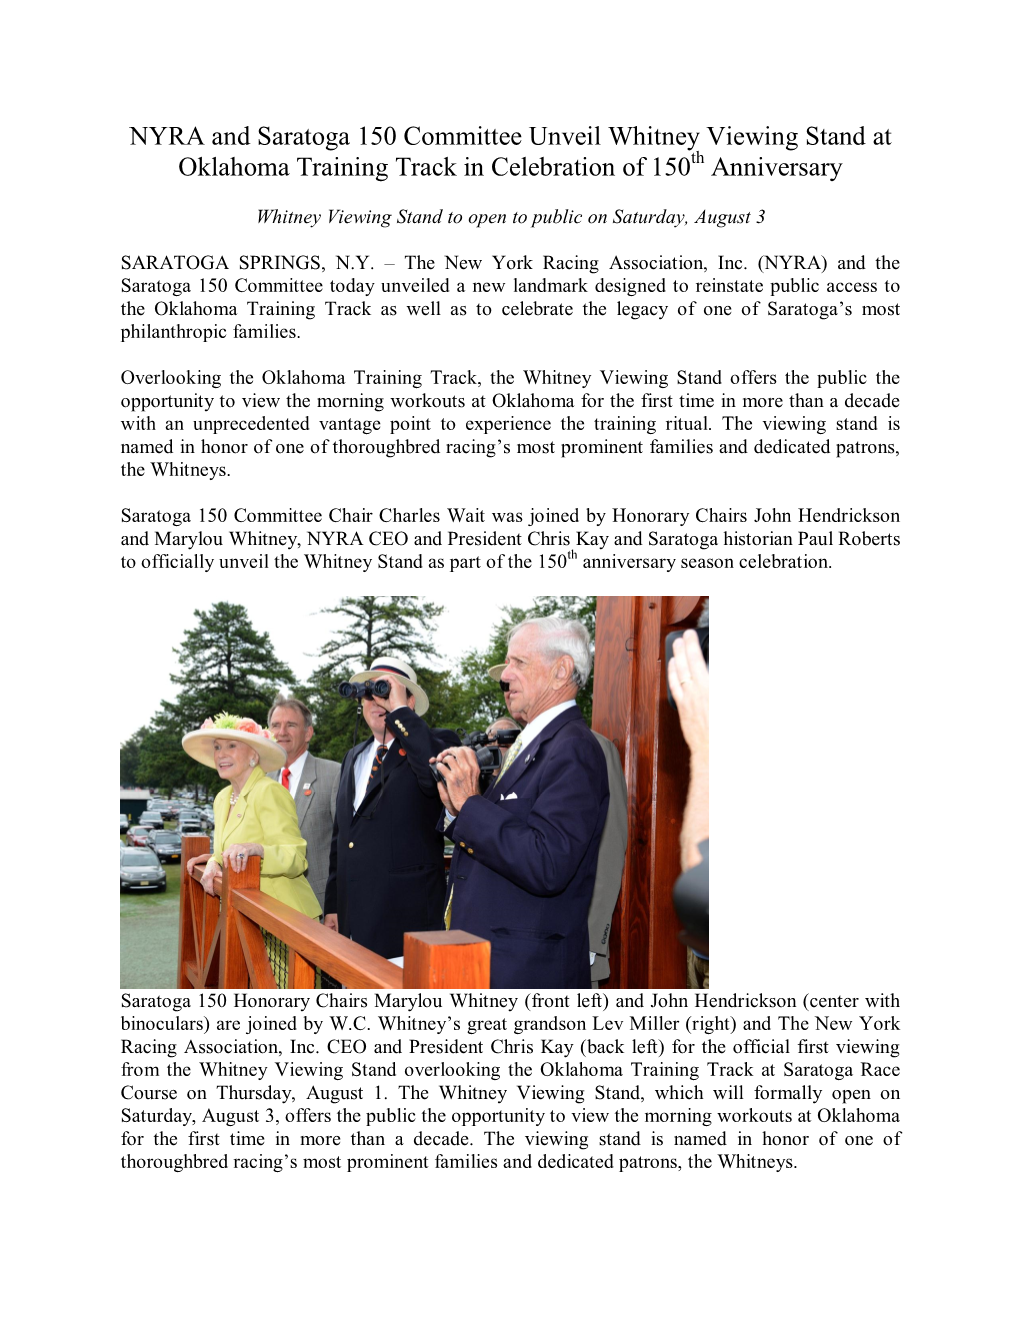 NYRA and Saratoga 150 Committee Unveil Whitney Viewing Stand at Oklahoma Training Track in Celebration of 150Th Anniversary